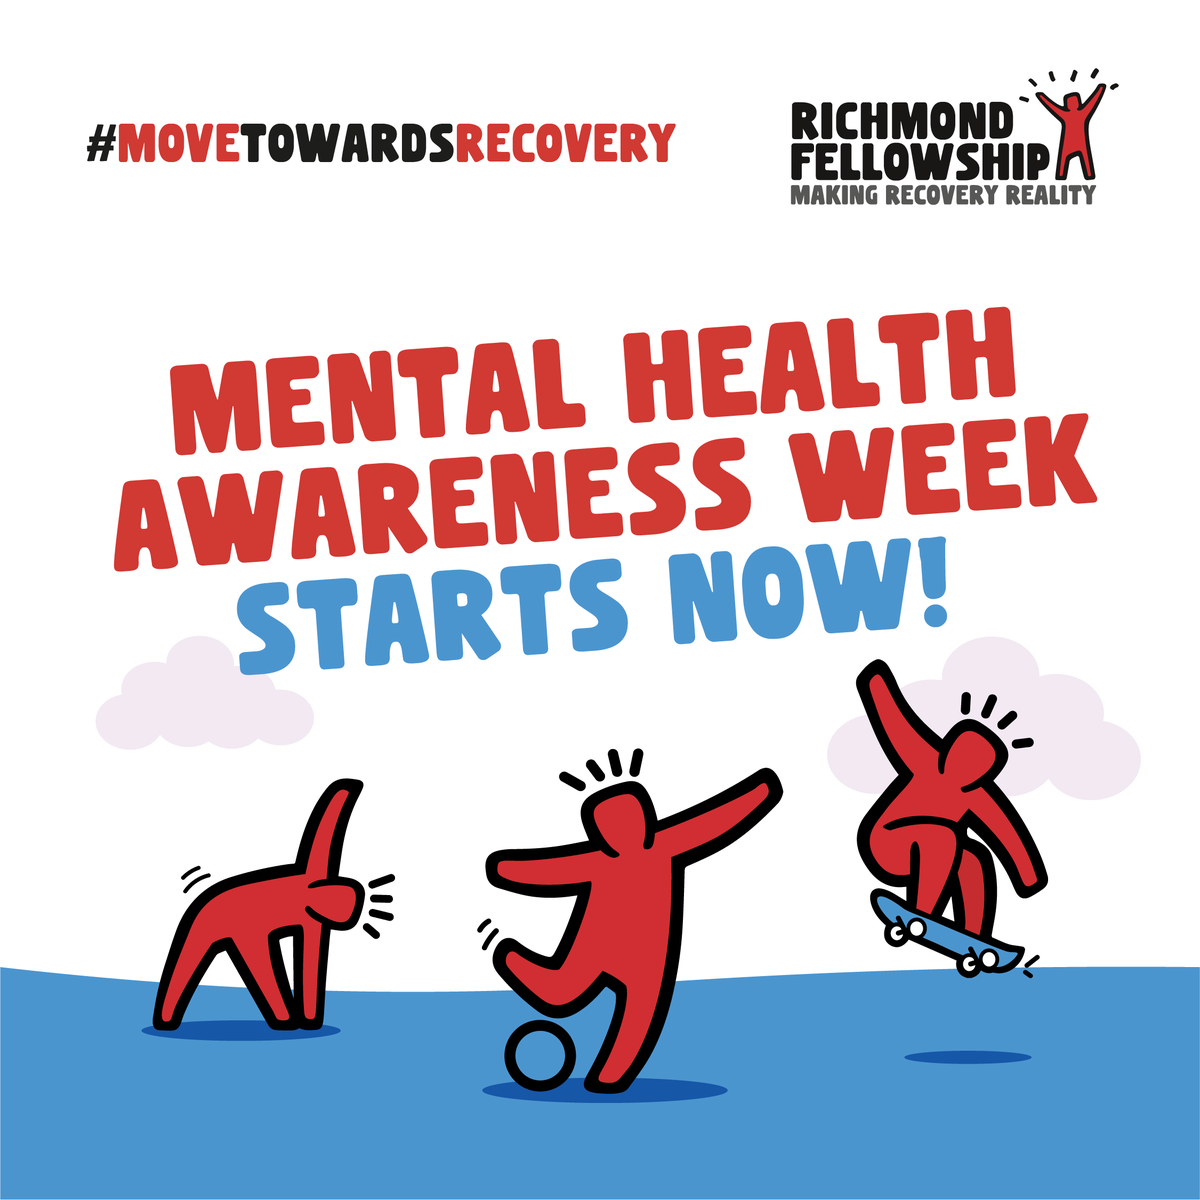 It's Mental Health Awareness Week! 🌟 This year's theme is 'Movement'. At Richmond Fellowship, we understand the power of movement in boosting mental wellbeing. How are you moving more for your mental health? 👇#MomentsForMovement #MoveTowardsRecovery